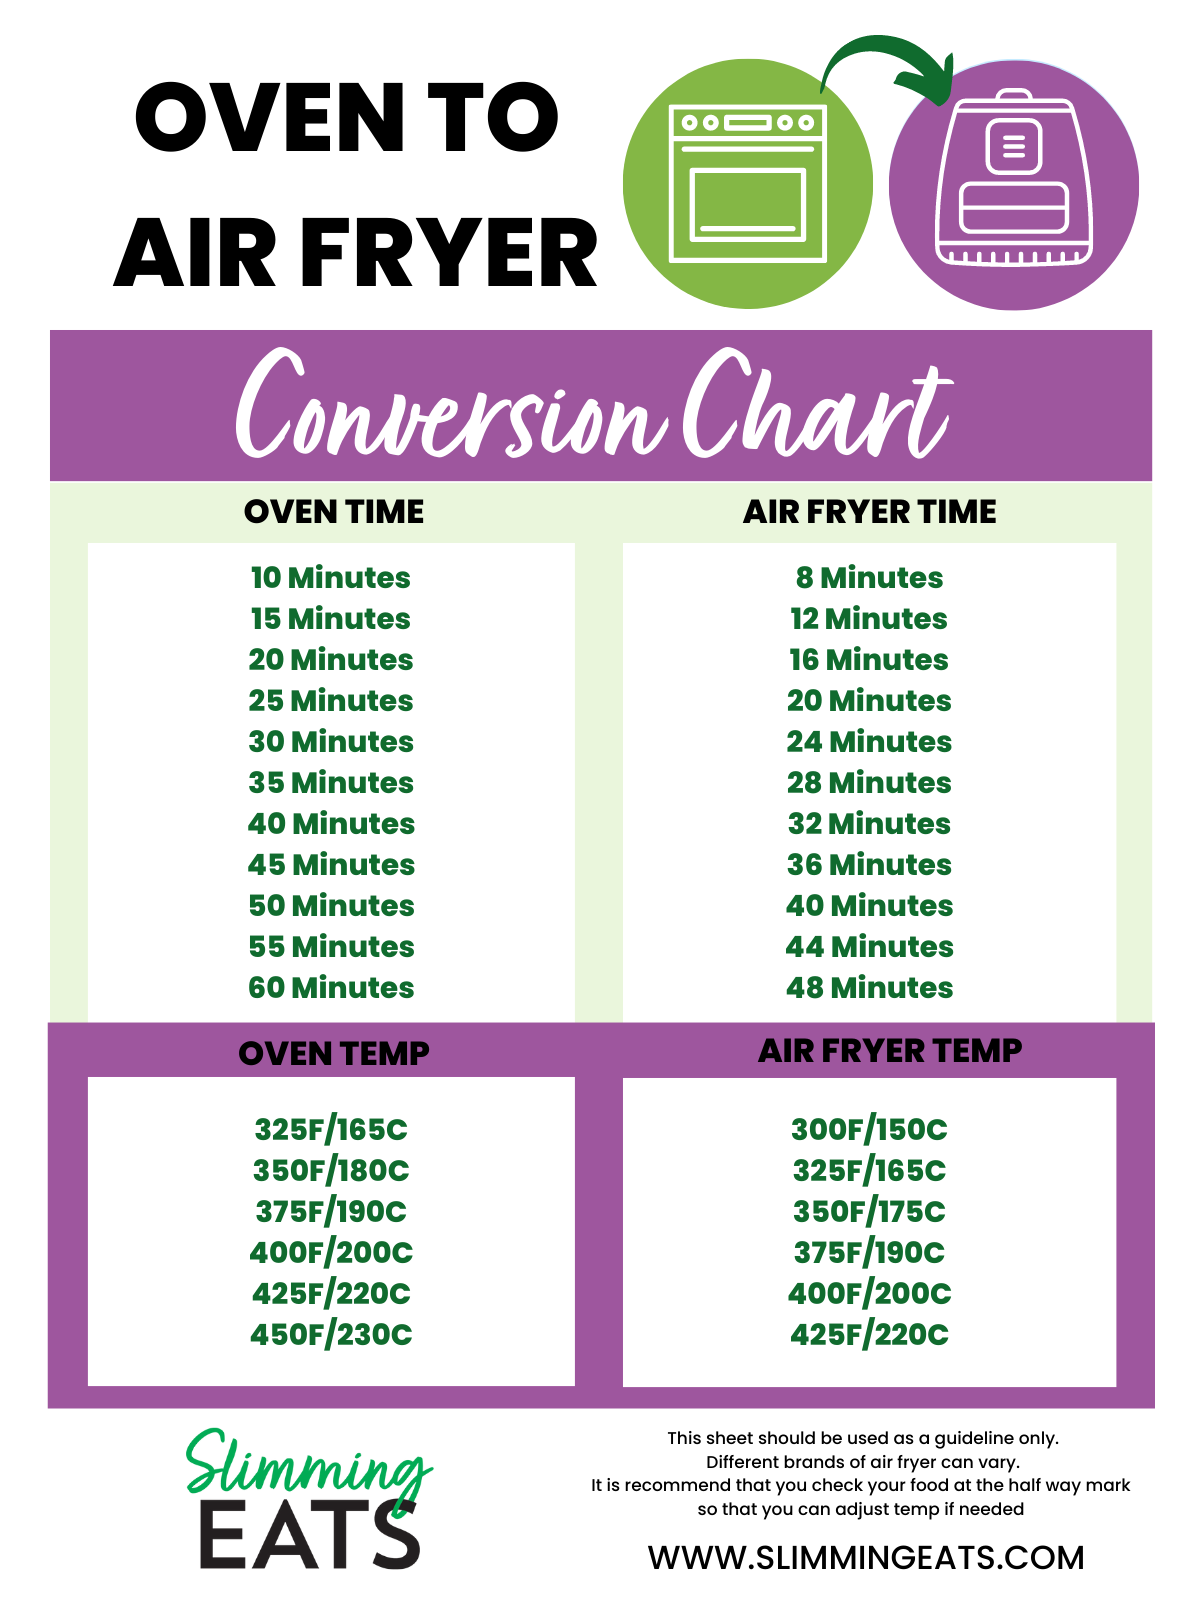 https://www.slimmingeats.com/blog/wp-content/uploads/2023/01/oven-to-air-fryer-conversion-chart-1.png